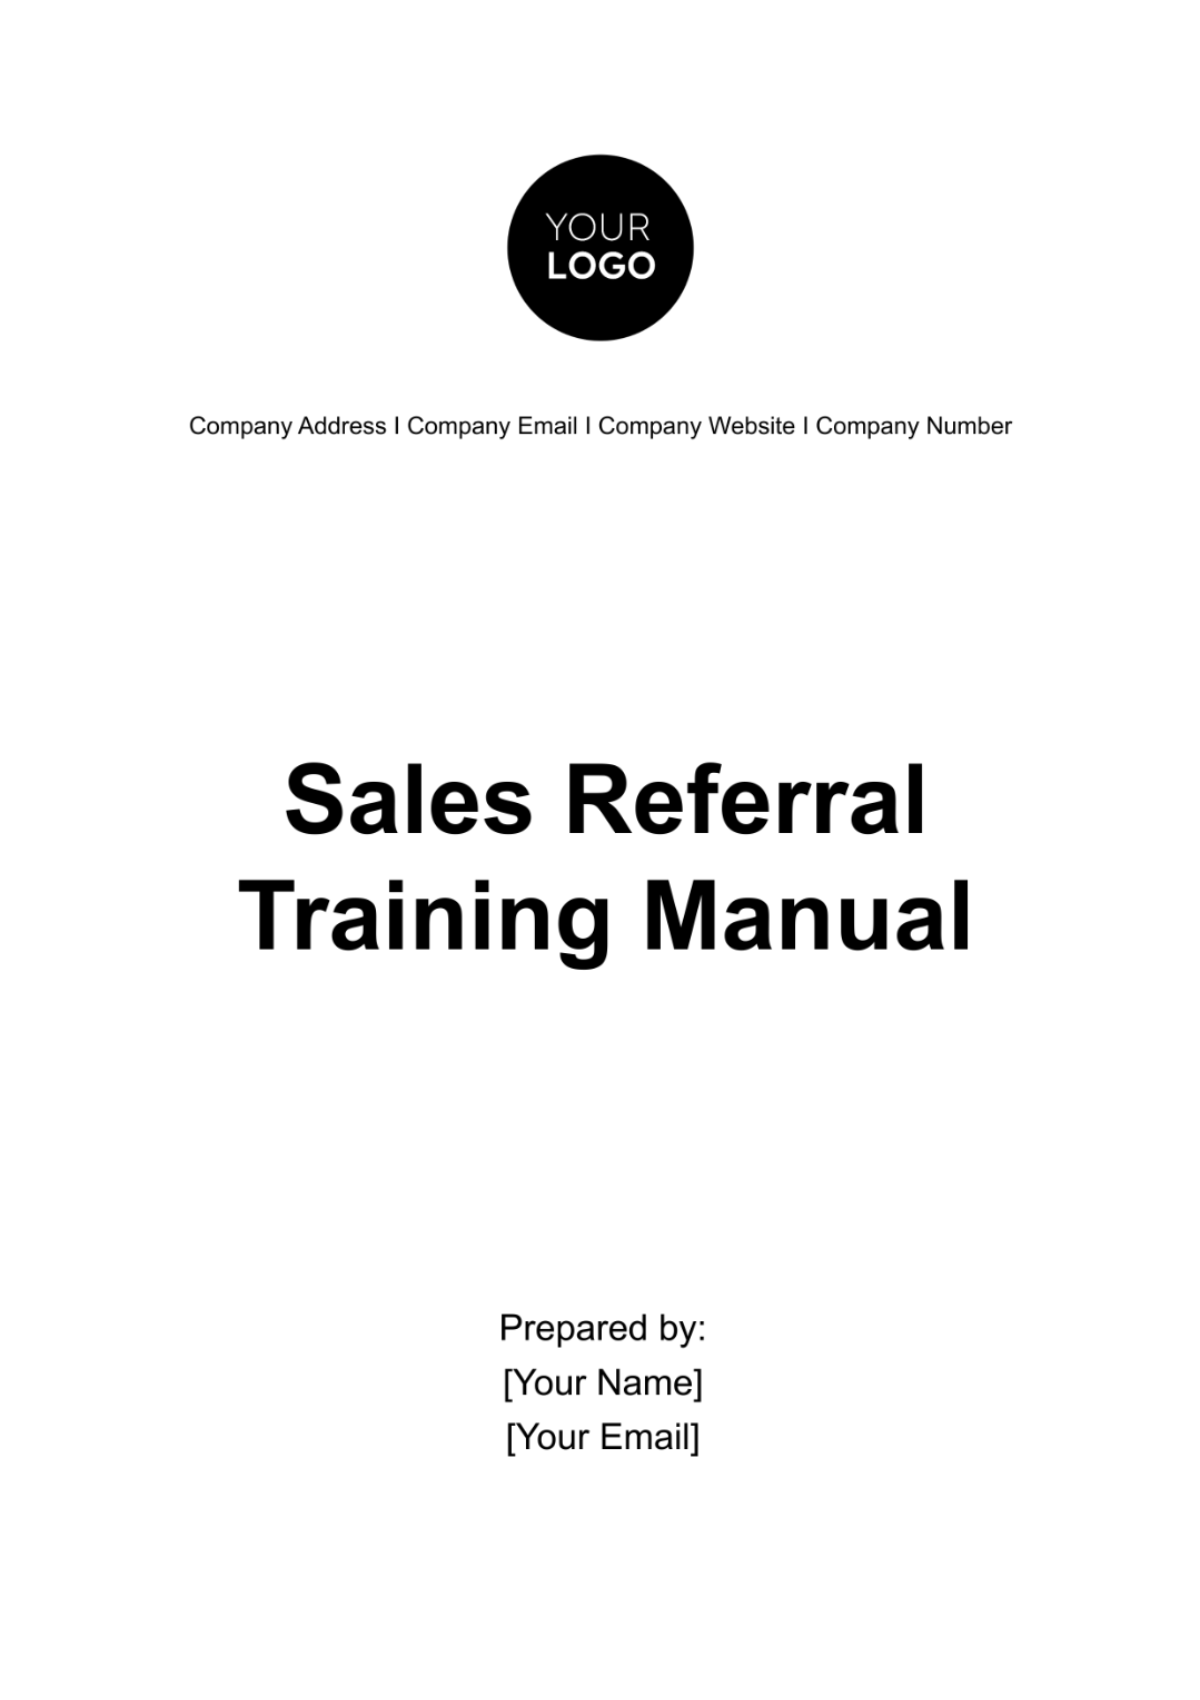 Free Sales Referral Training Manual Template